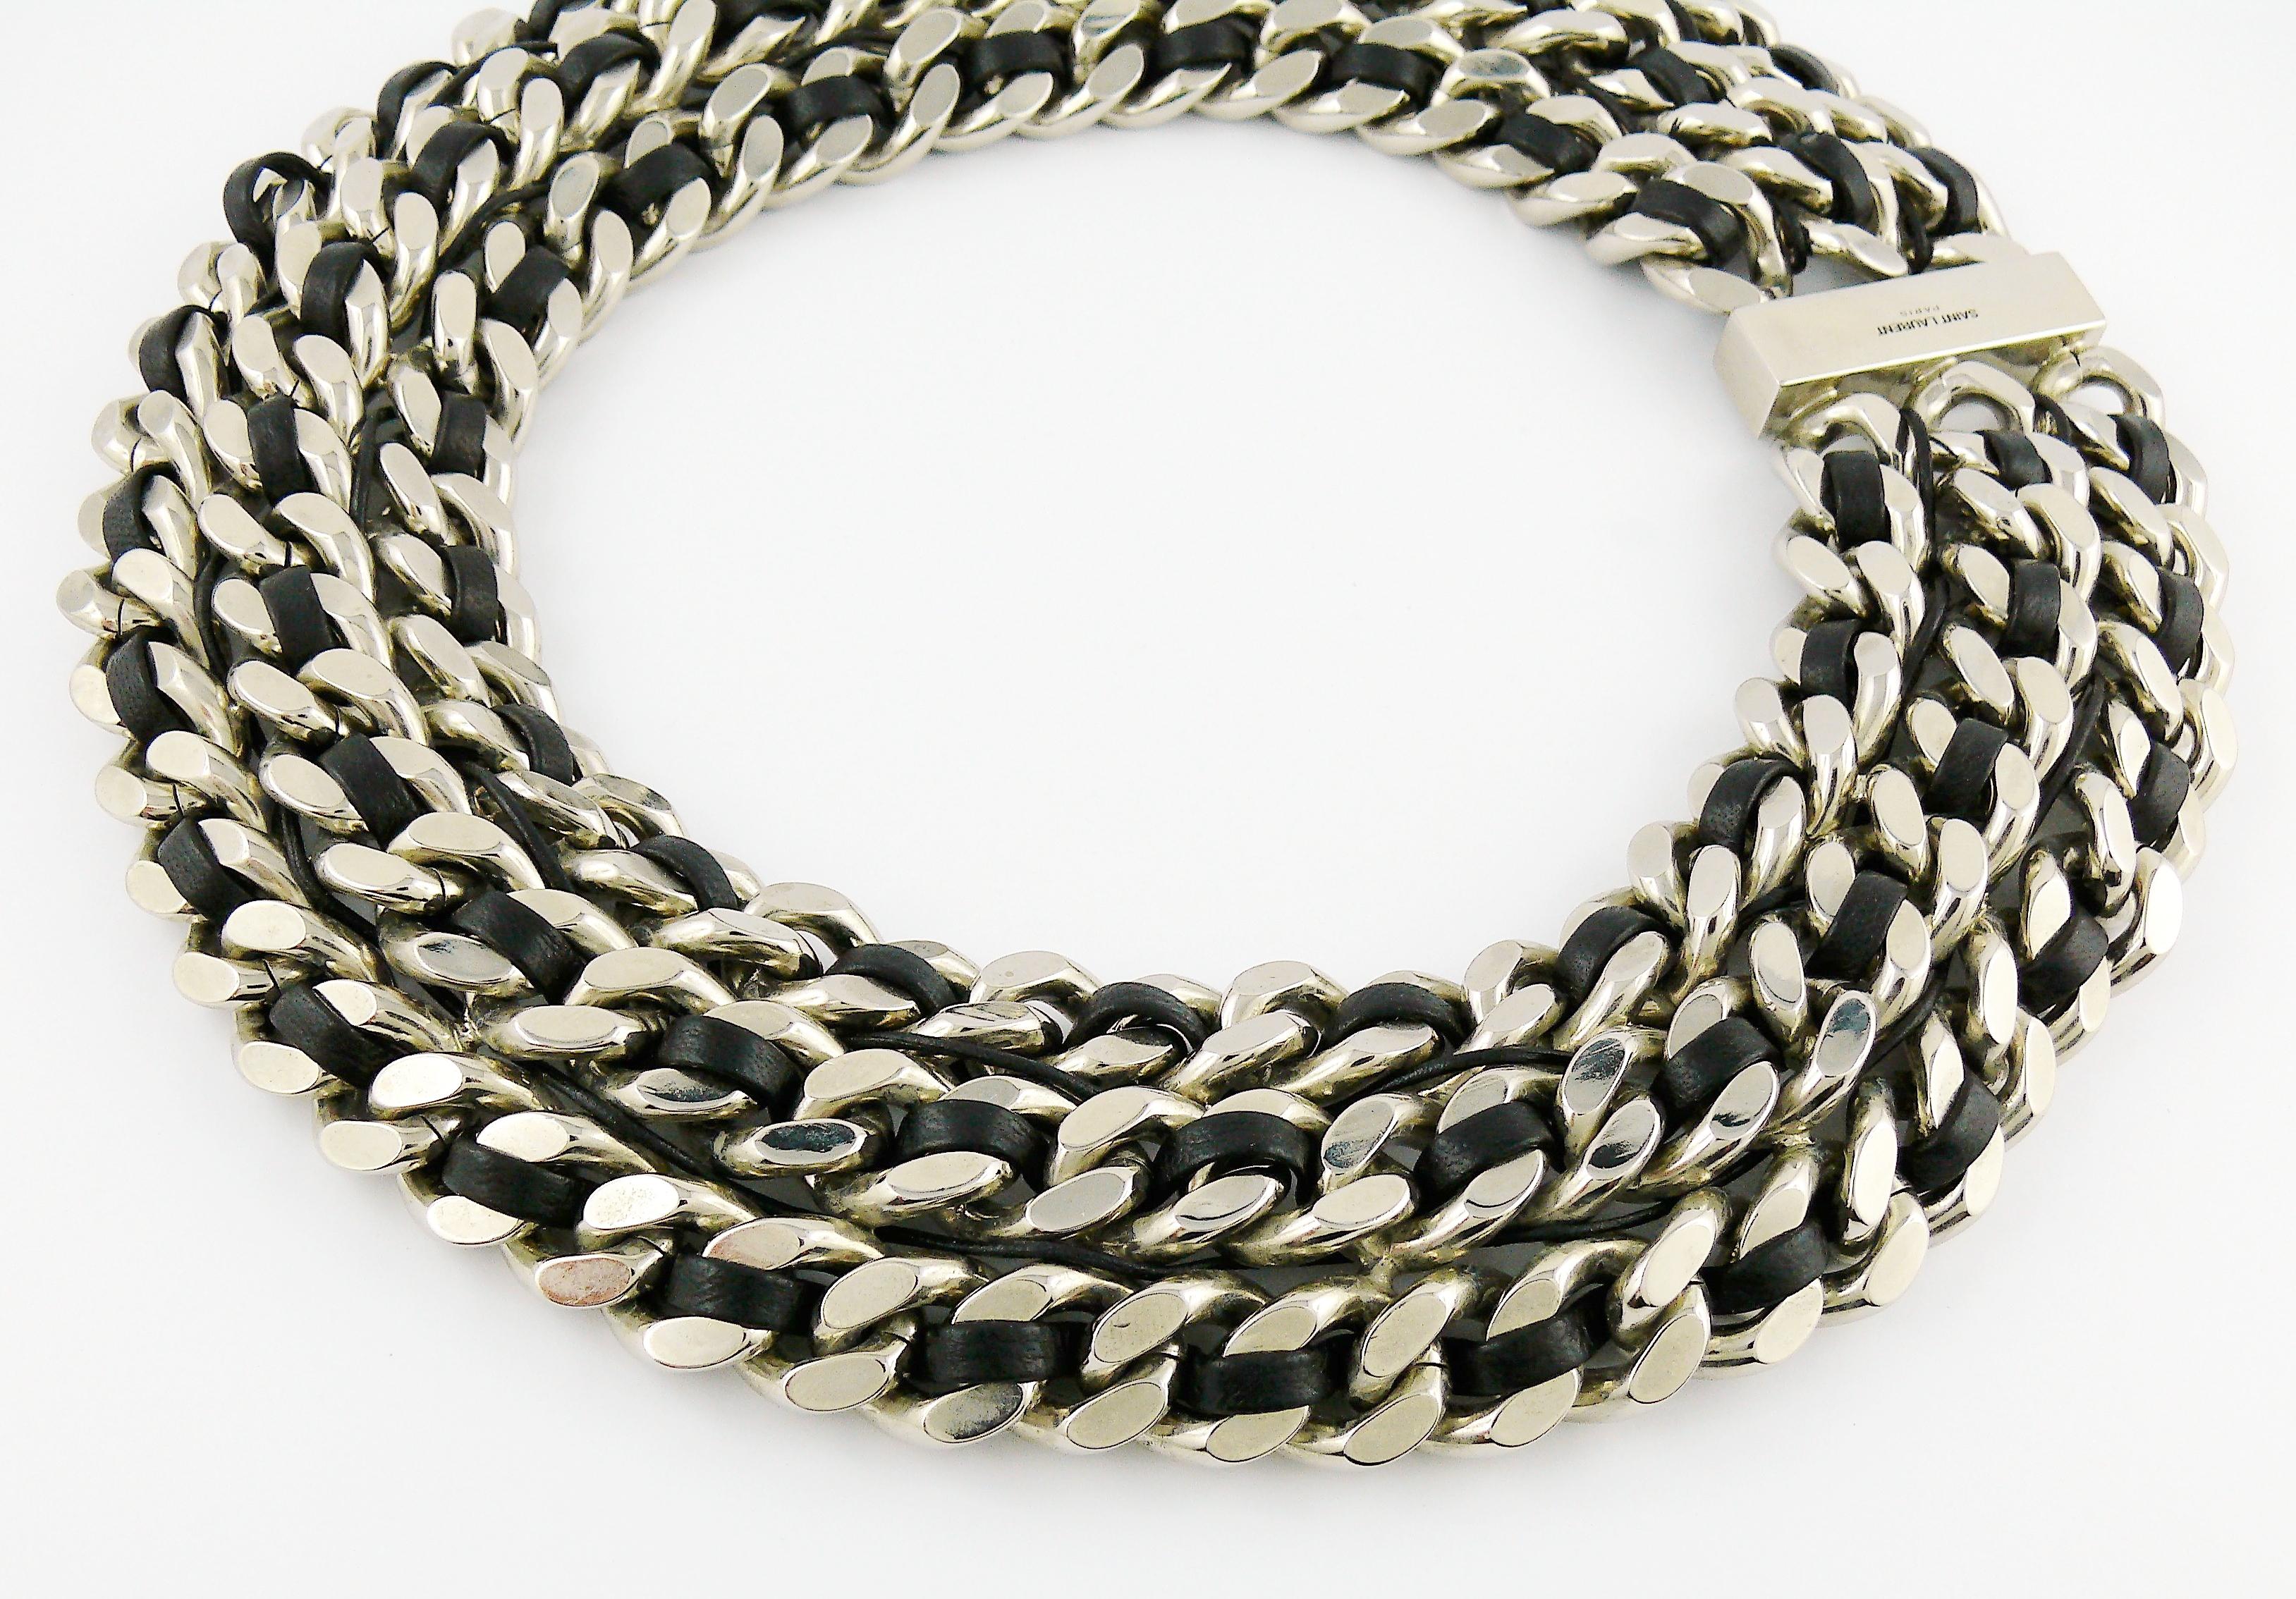 Women's Saint Laurent Woven Leather Chunky Curb Chain Choker Necklace